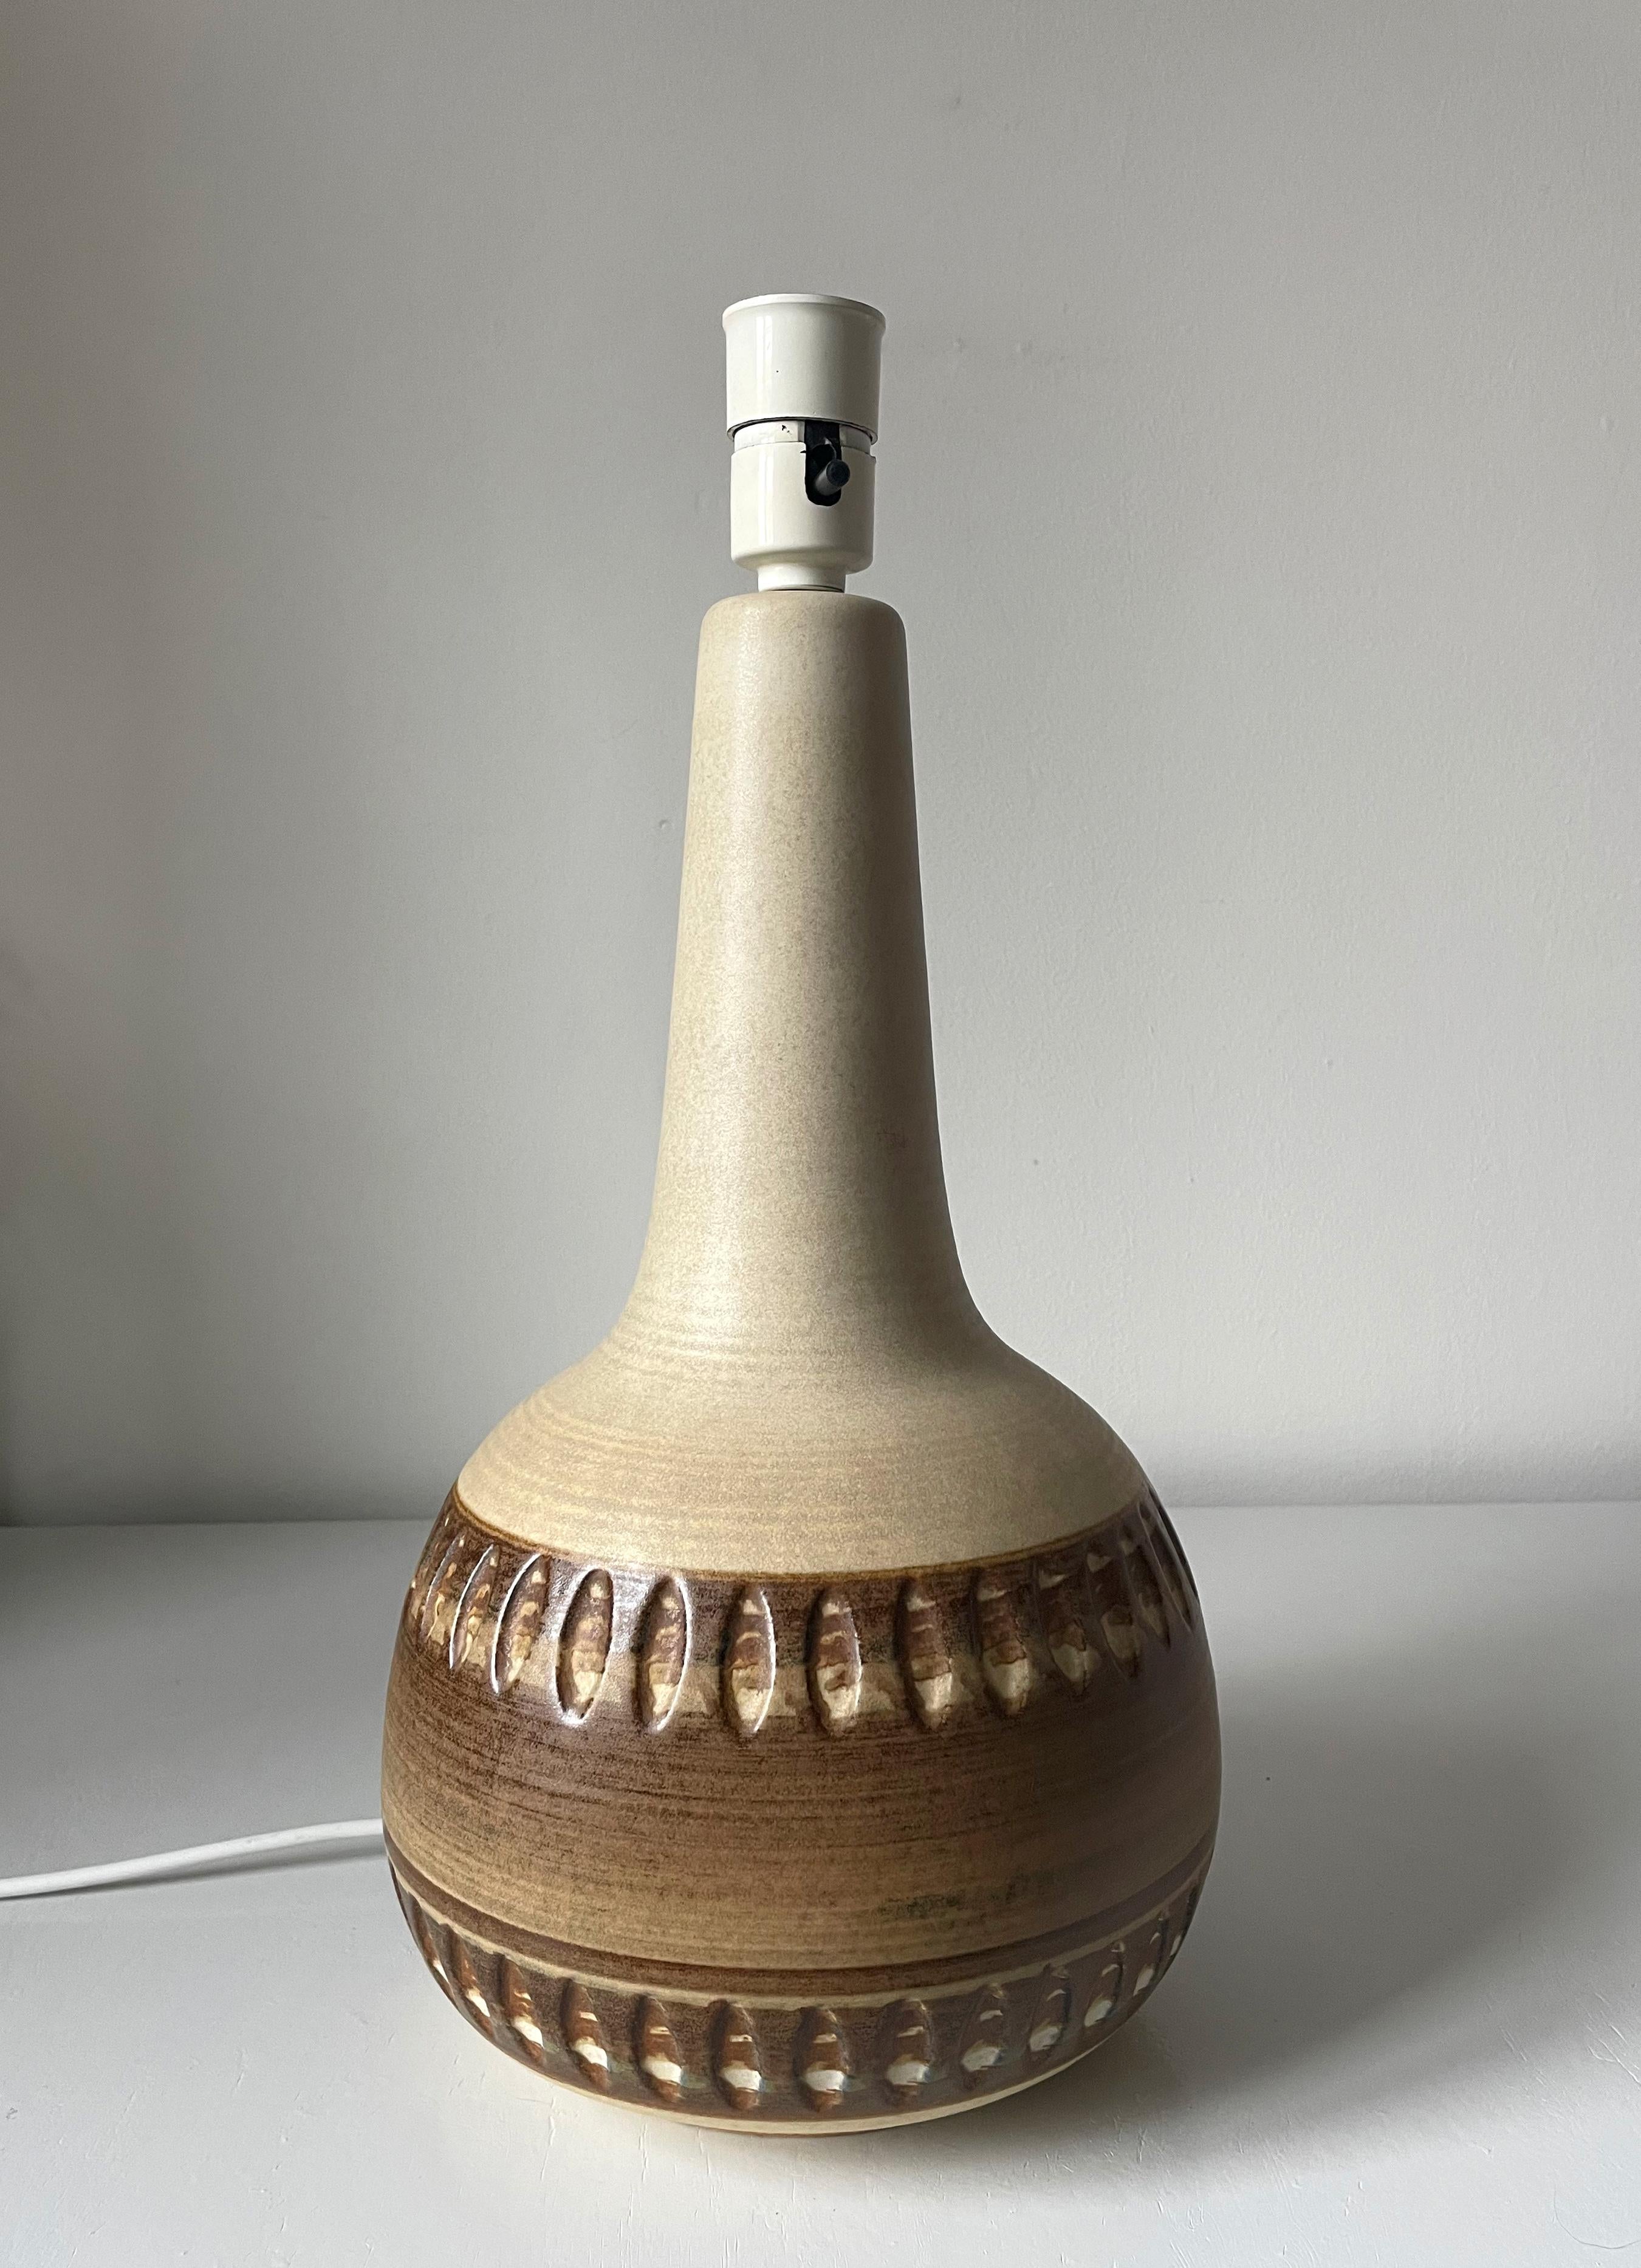 Tall 1960s Danish Modern Earth Toned Stoneware Søholm Lamp In Good Condition For Sale In Copenhagen, DK